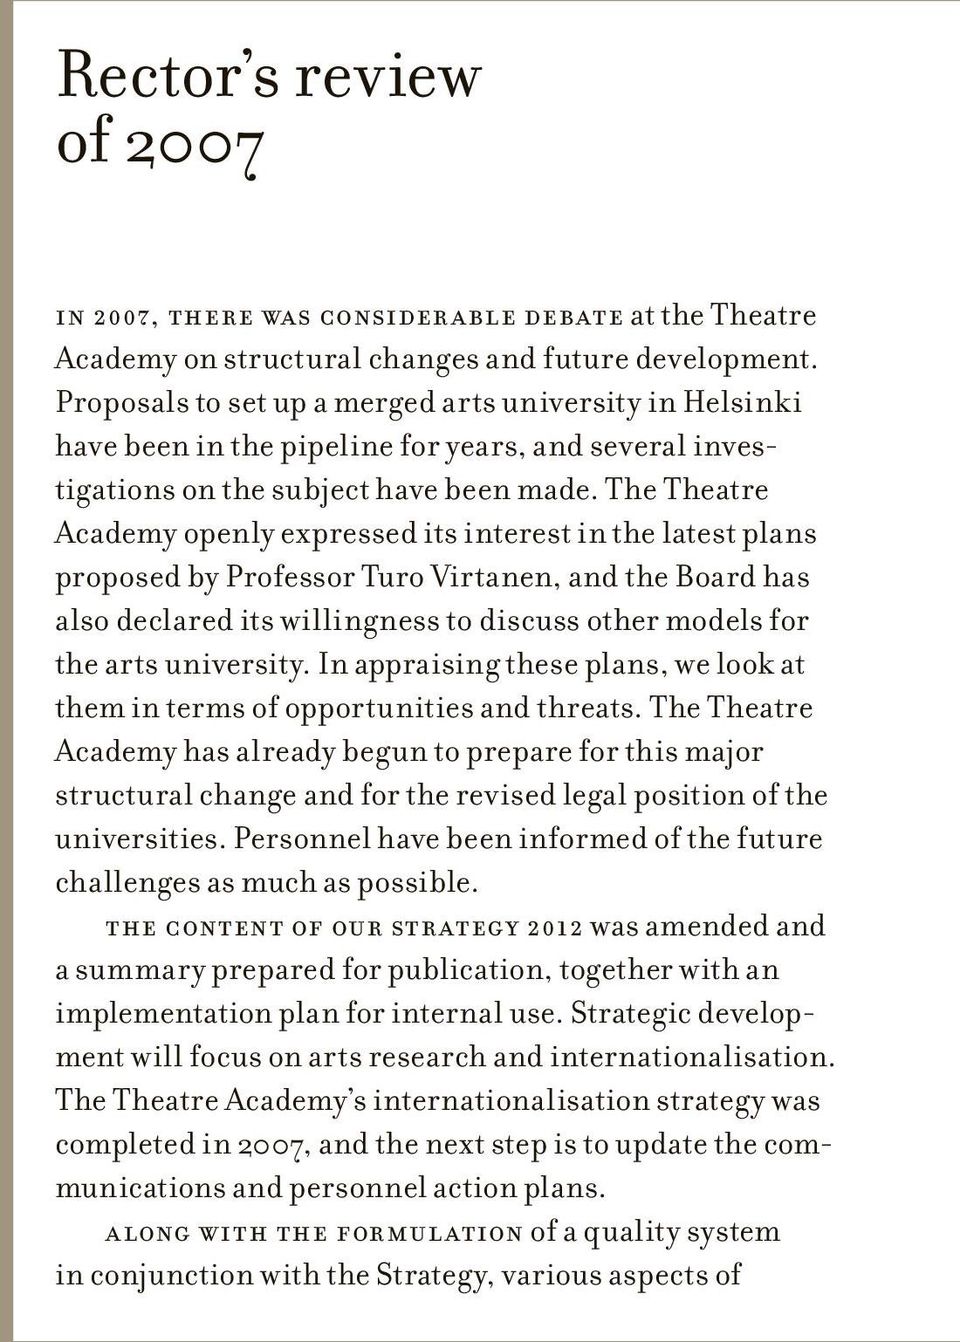 The Theatre Academy openly expressed its interest in the latest plans proposed by Professor Turo Virtanen, and the Board has also declared its willingness to discuss other models for the arts